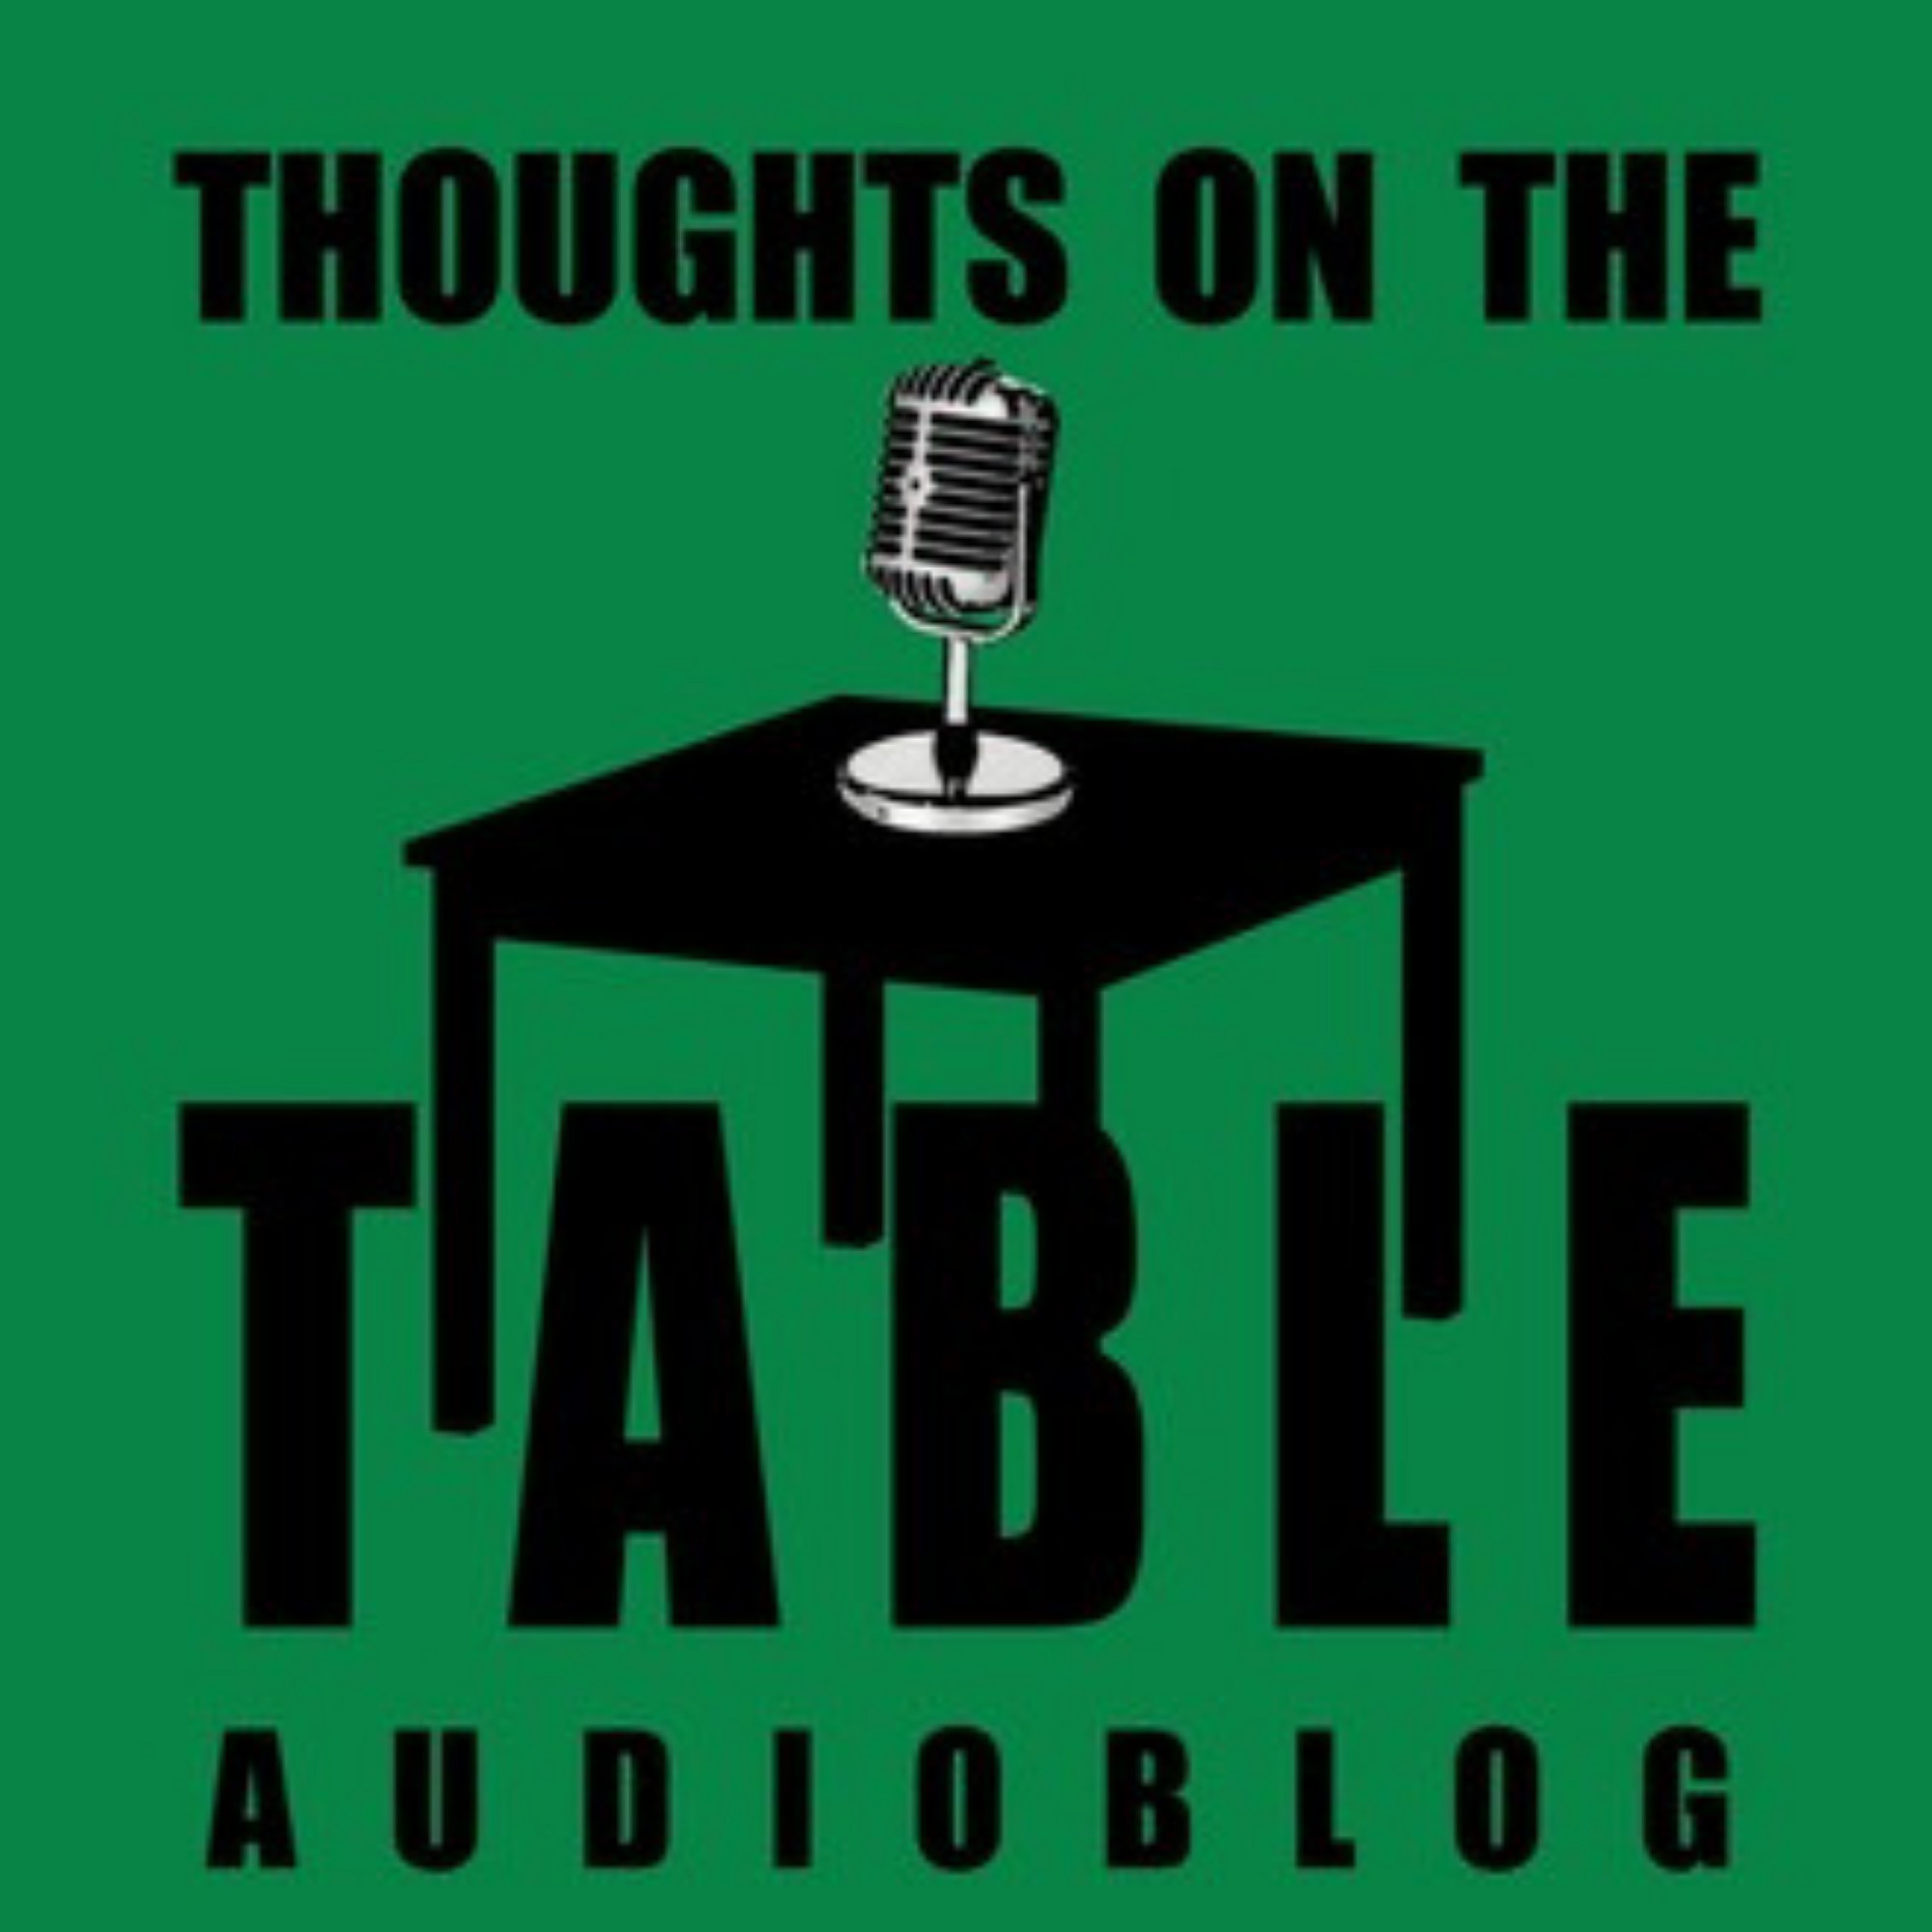 Favorite Podcasts for Italophiles